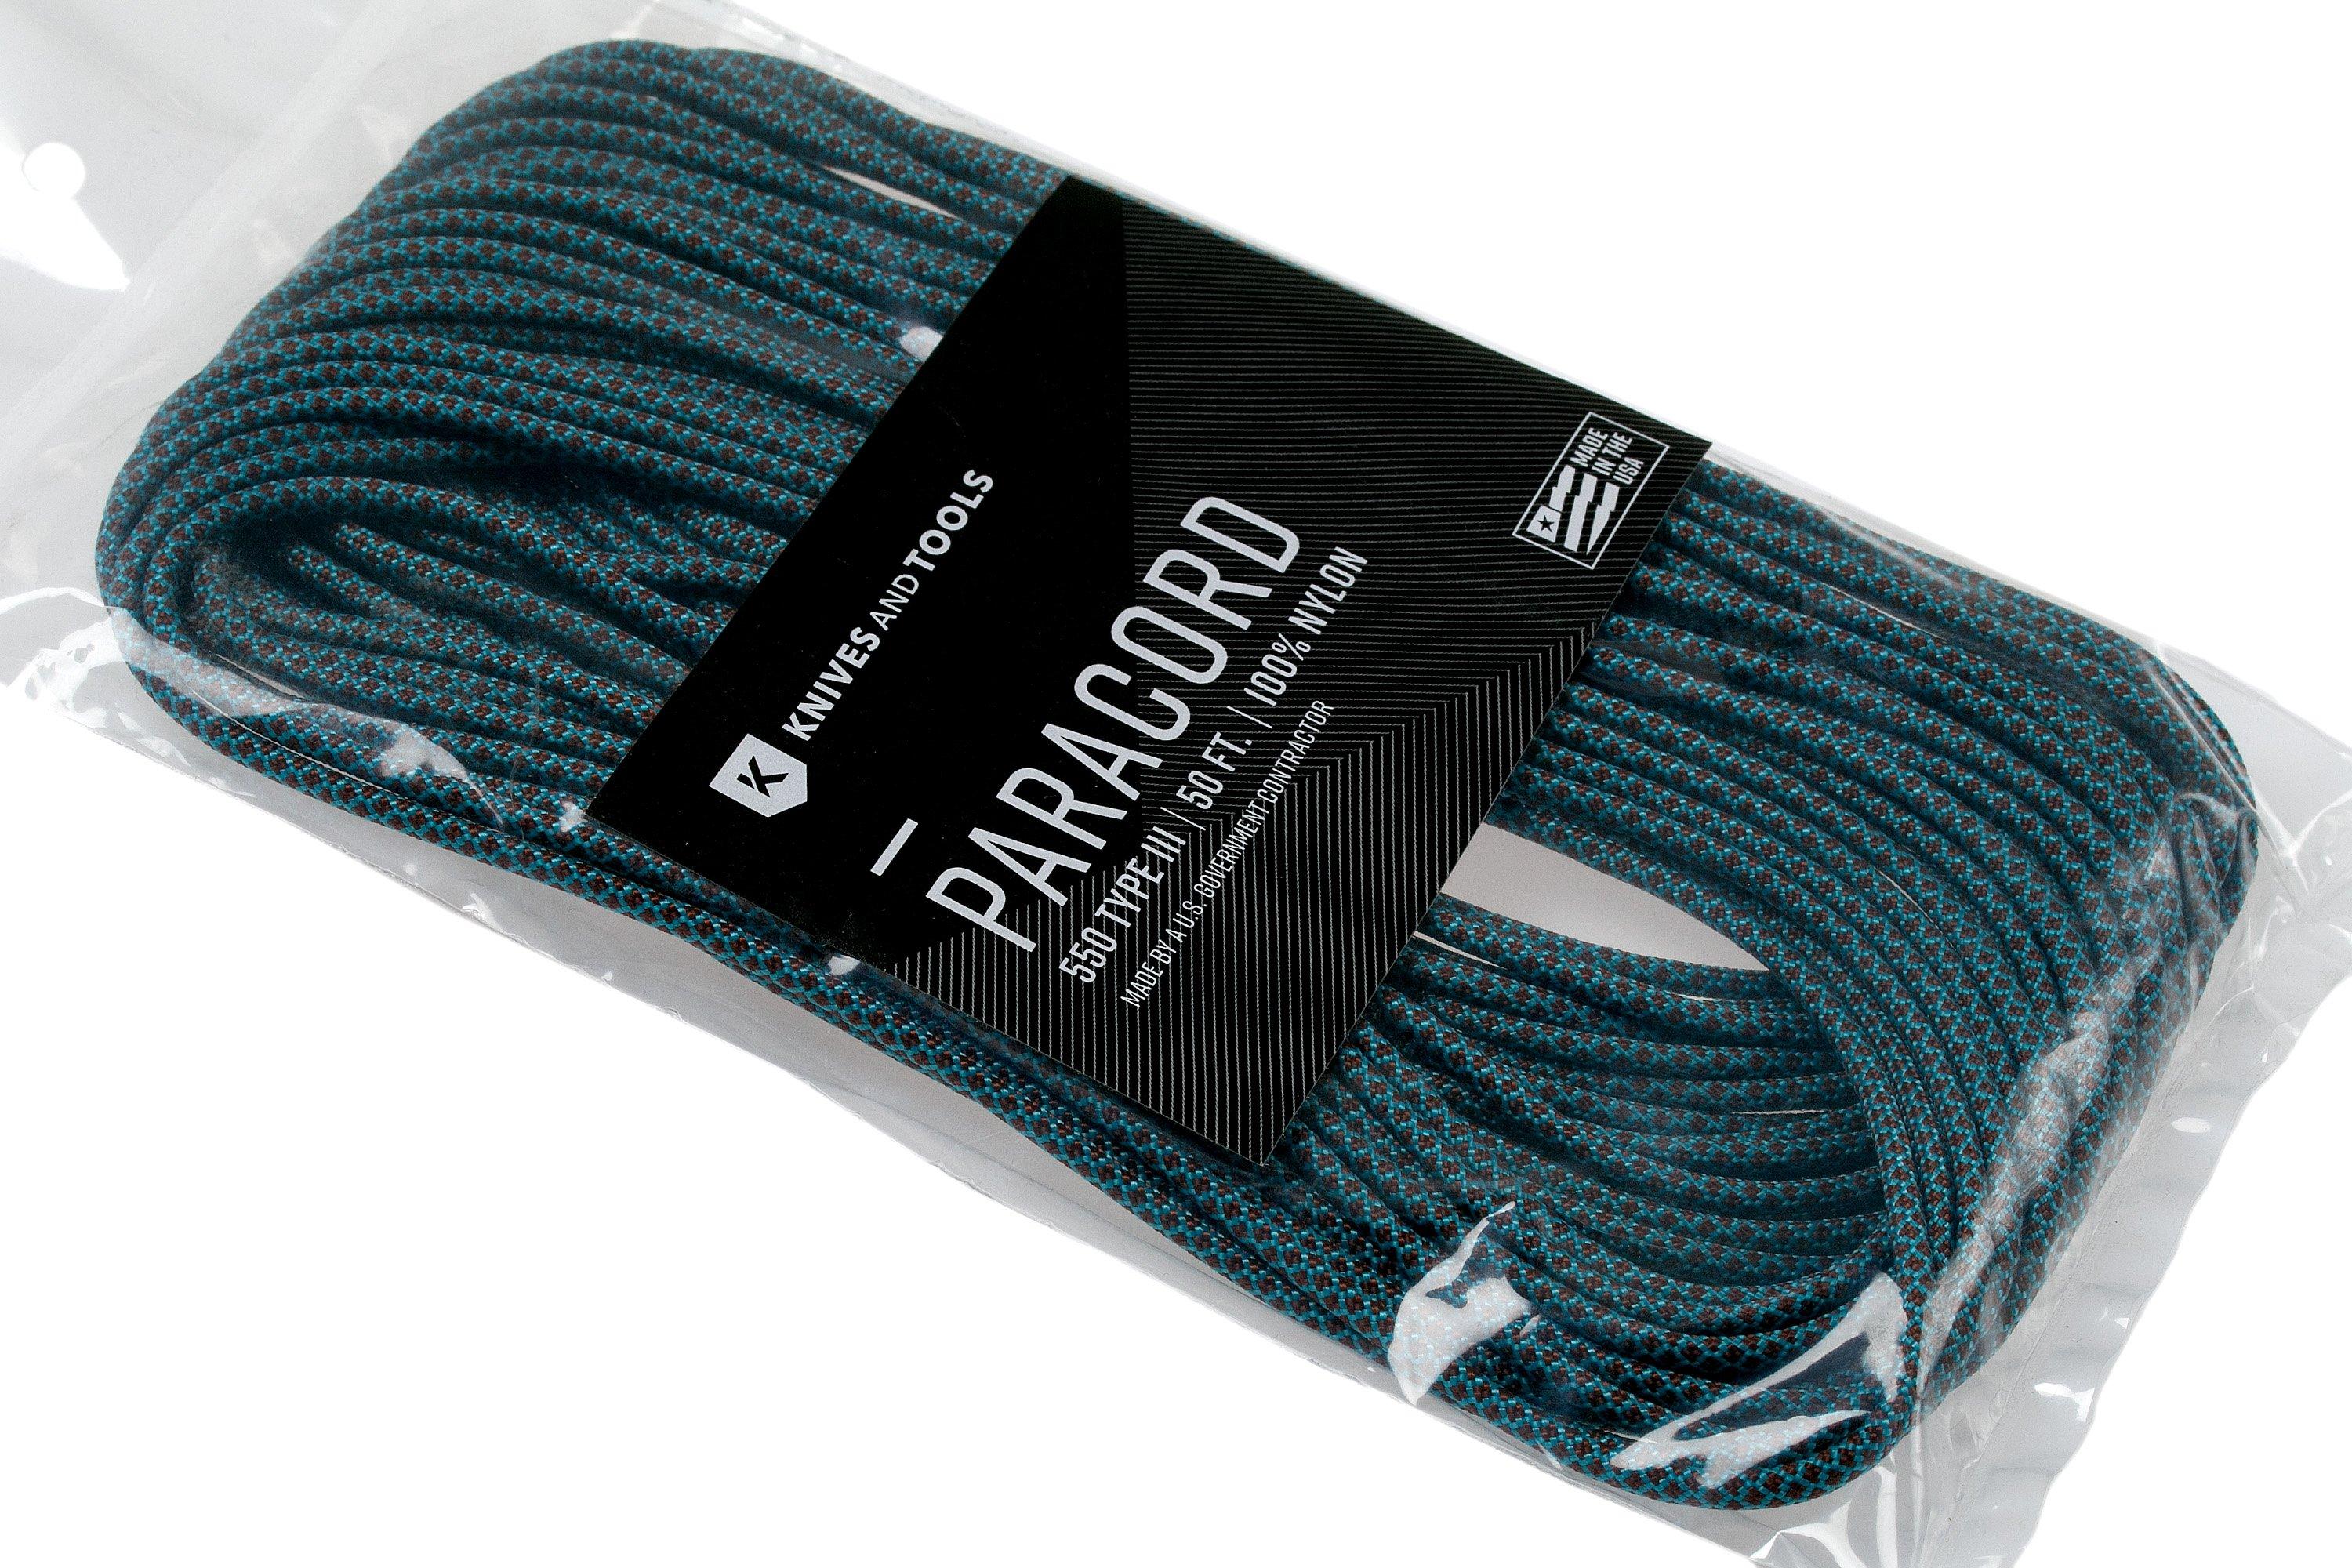 Knivesandtools 550 paracord type III, colour: neon turquoise with